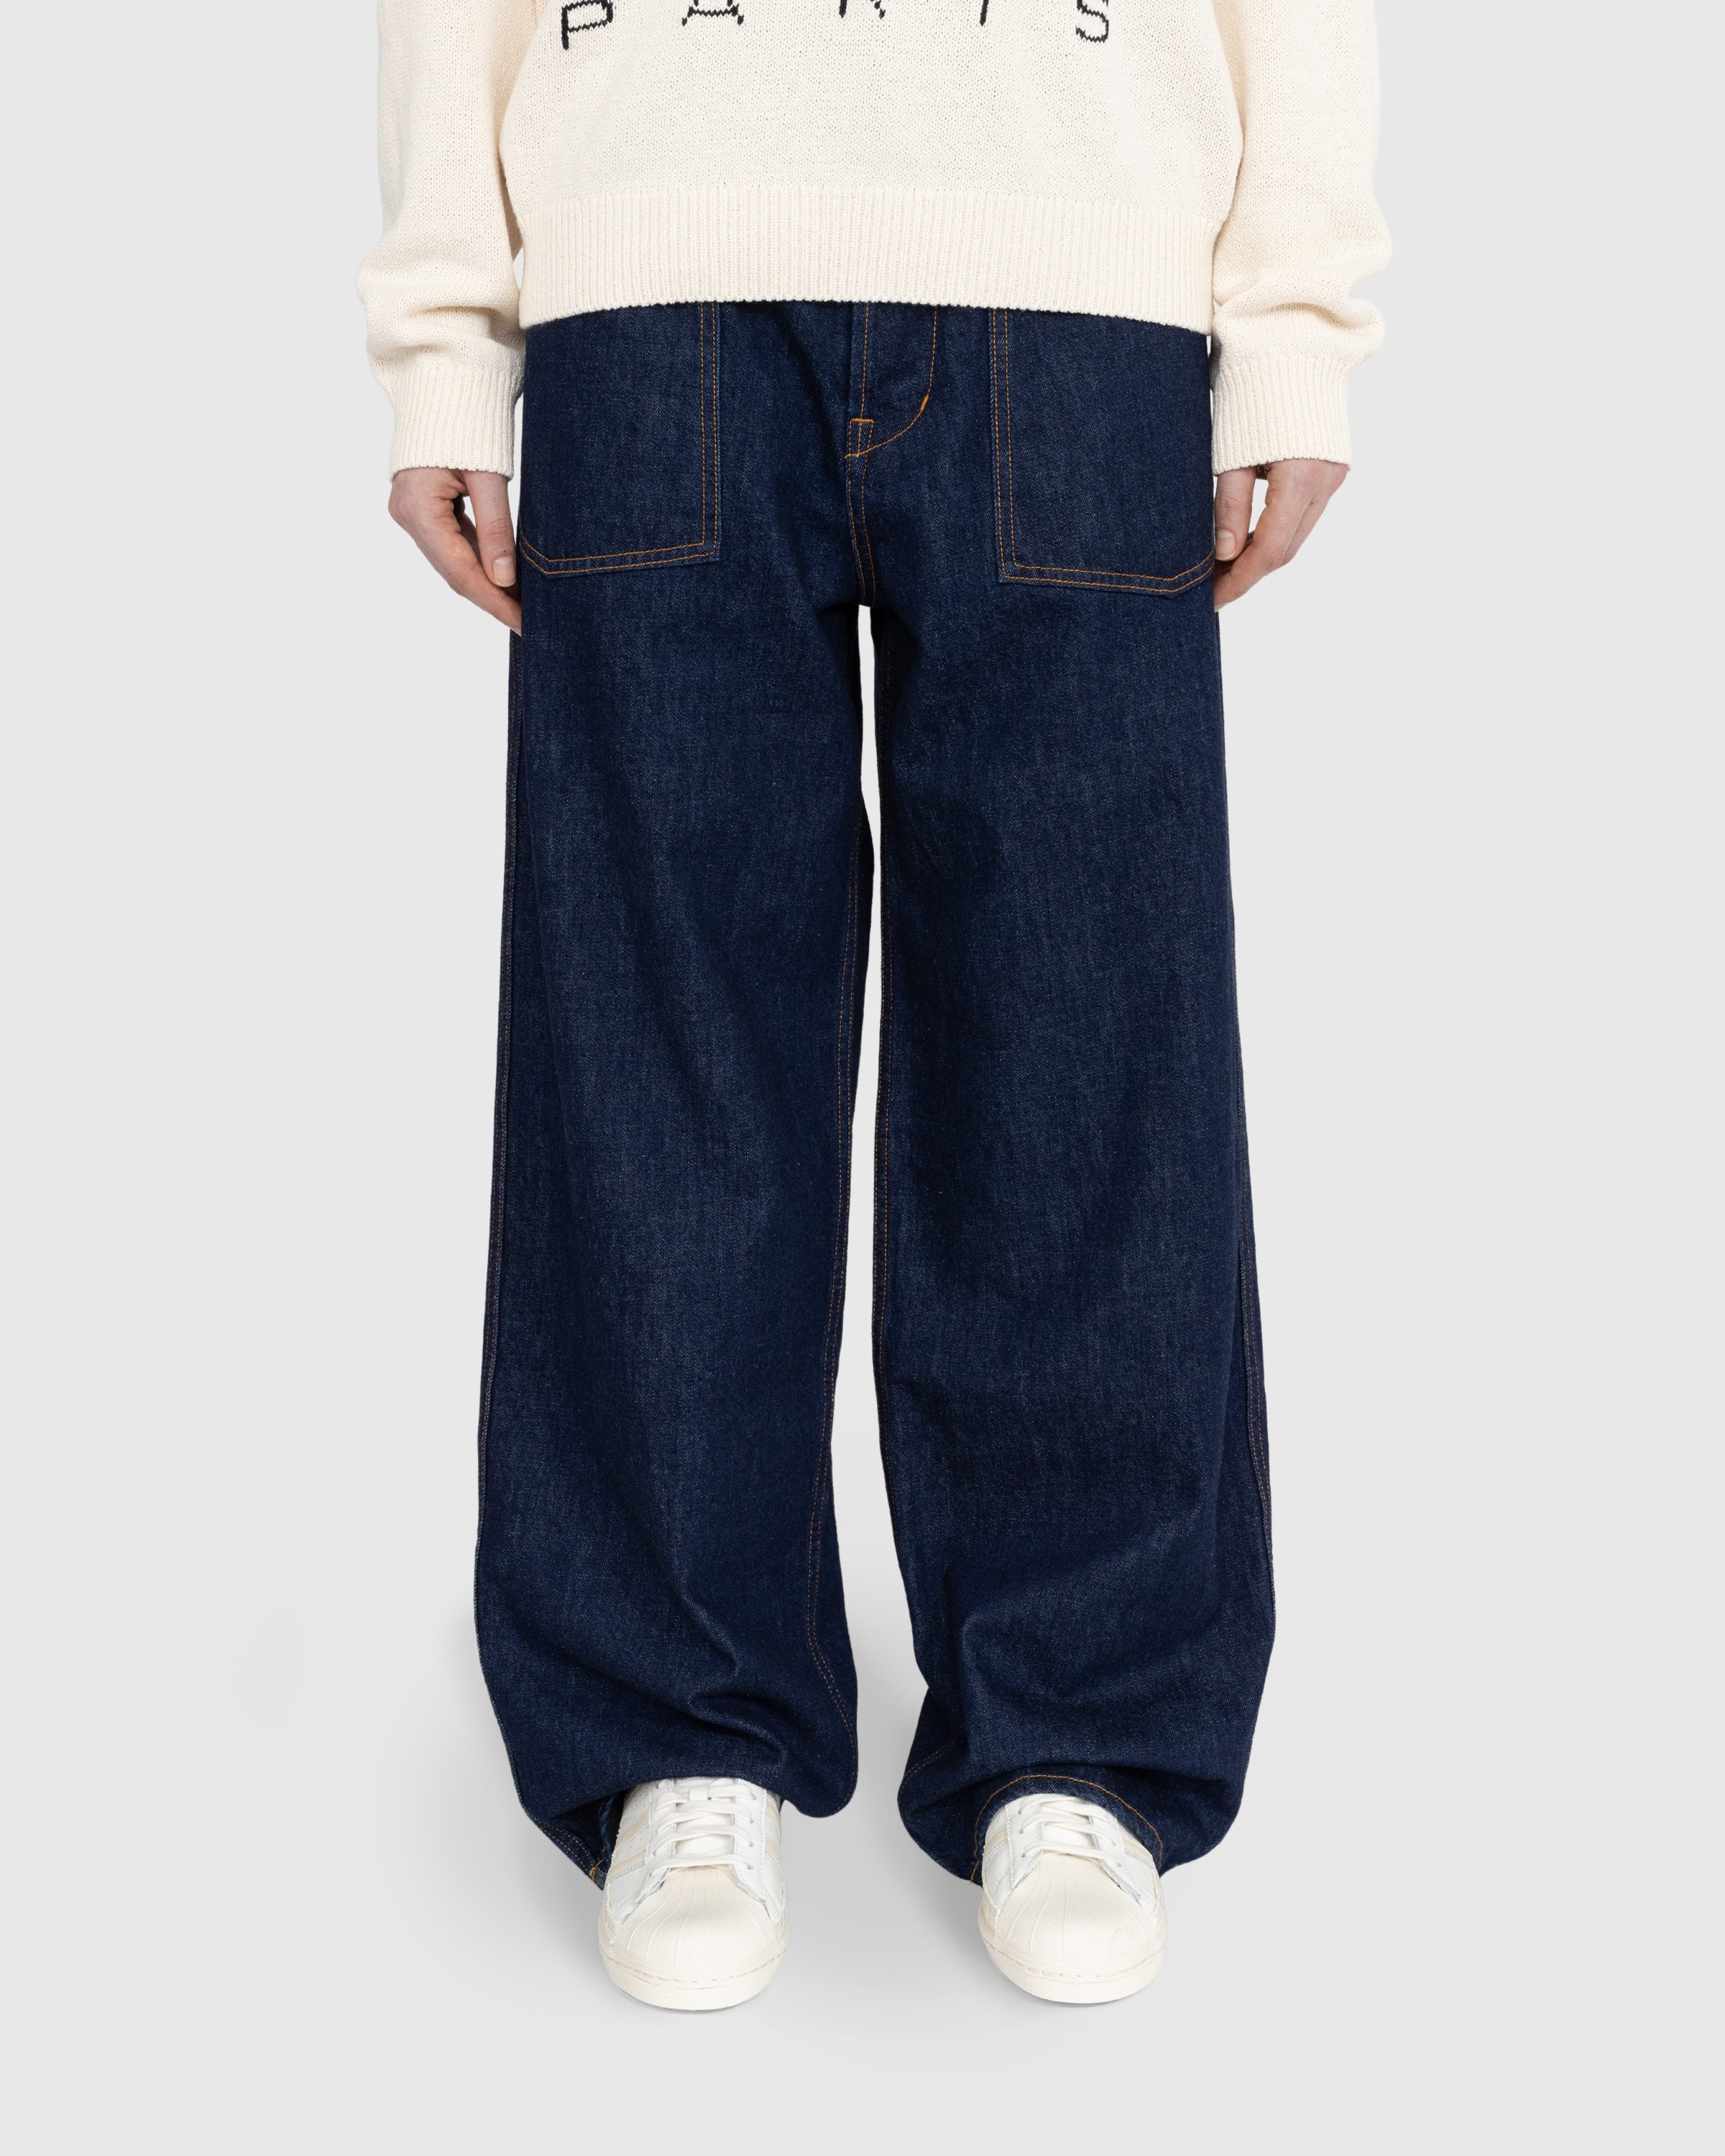 Kenzo - Sailor Loose Jeans - Clothing - Blue - Image 2